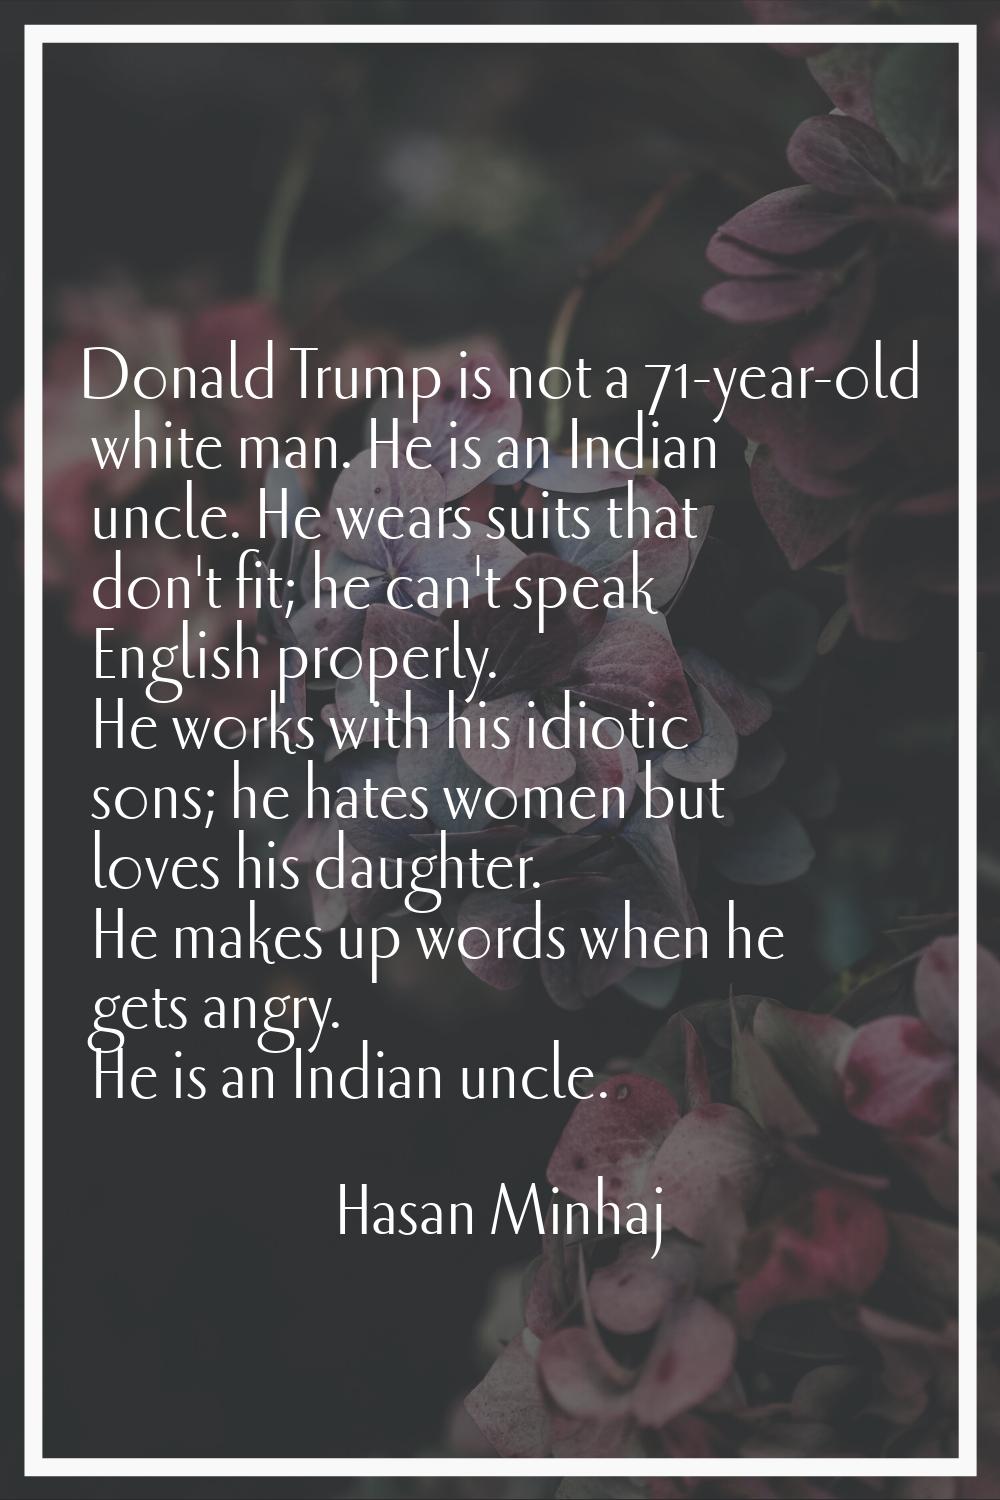 Donald Trump is not a 71-year-old white man. He is an Indian uncle. He wears suits that don't fit; 